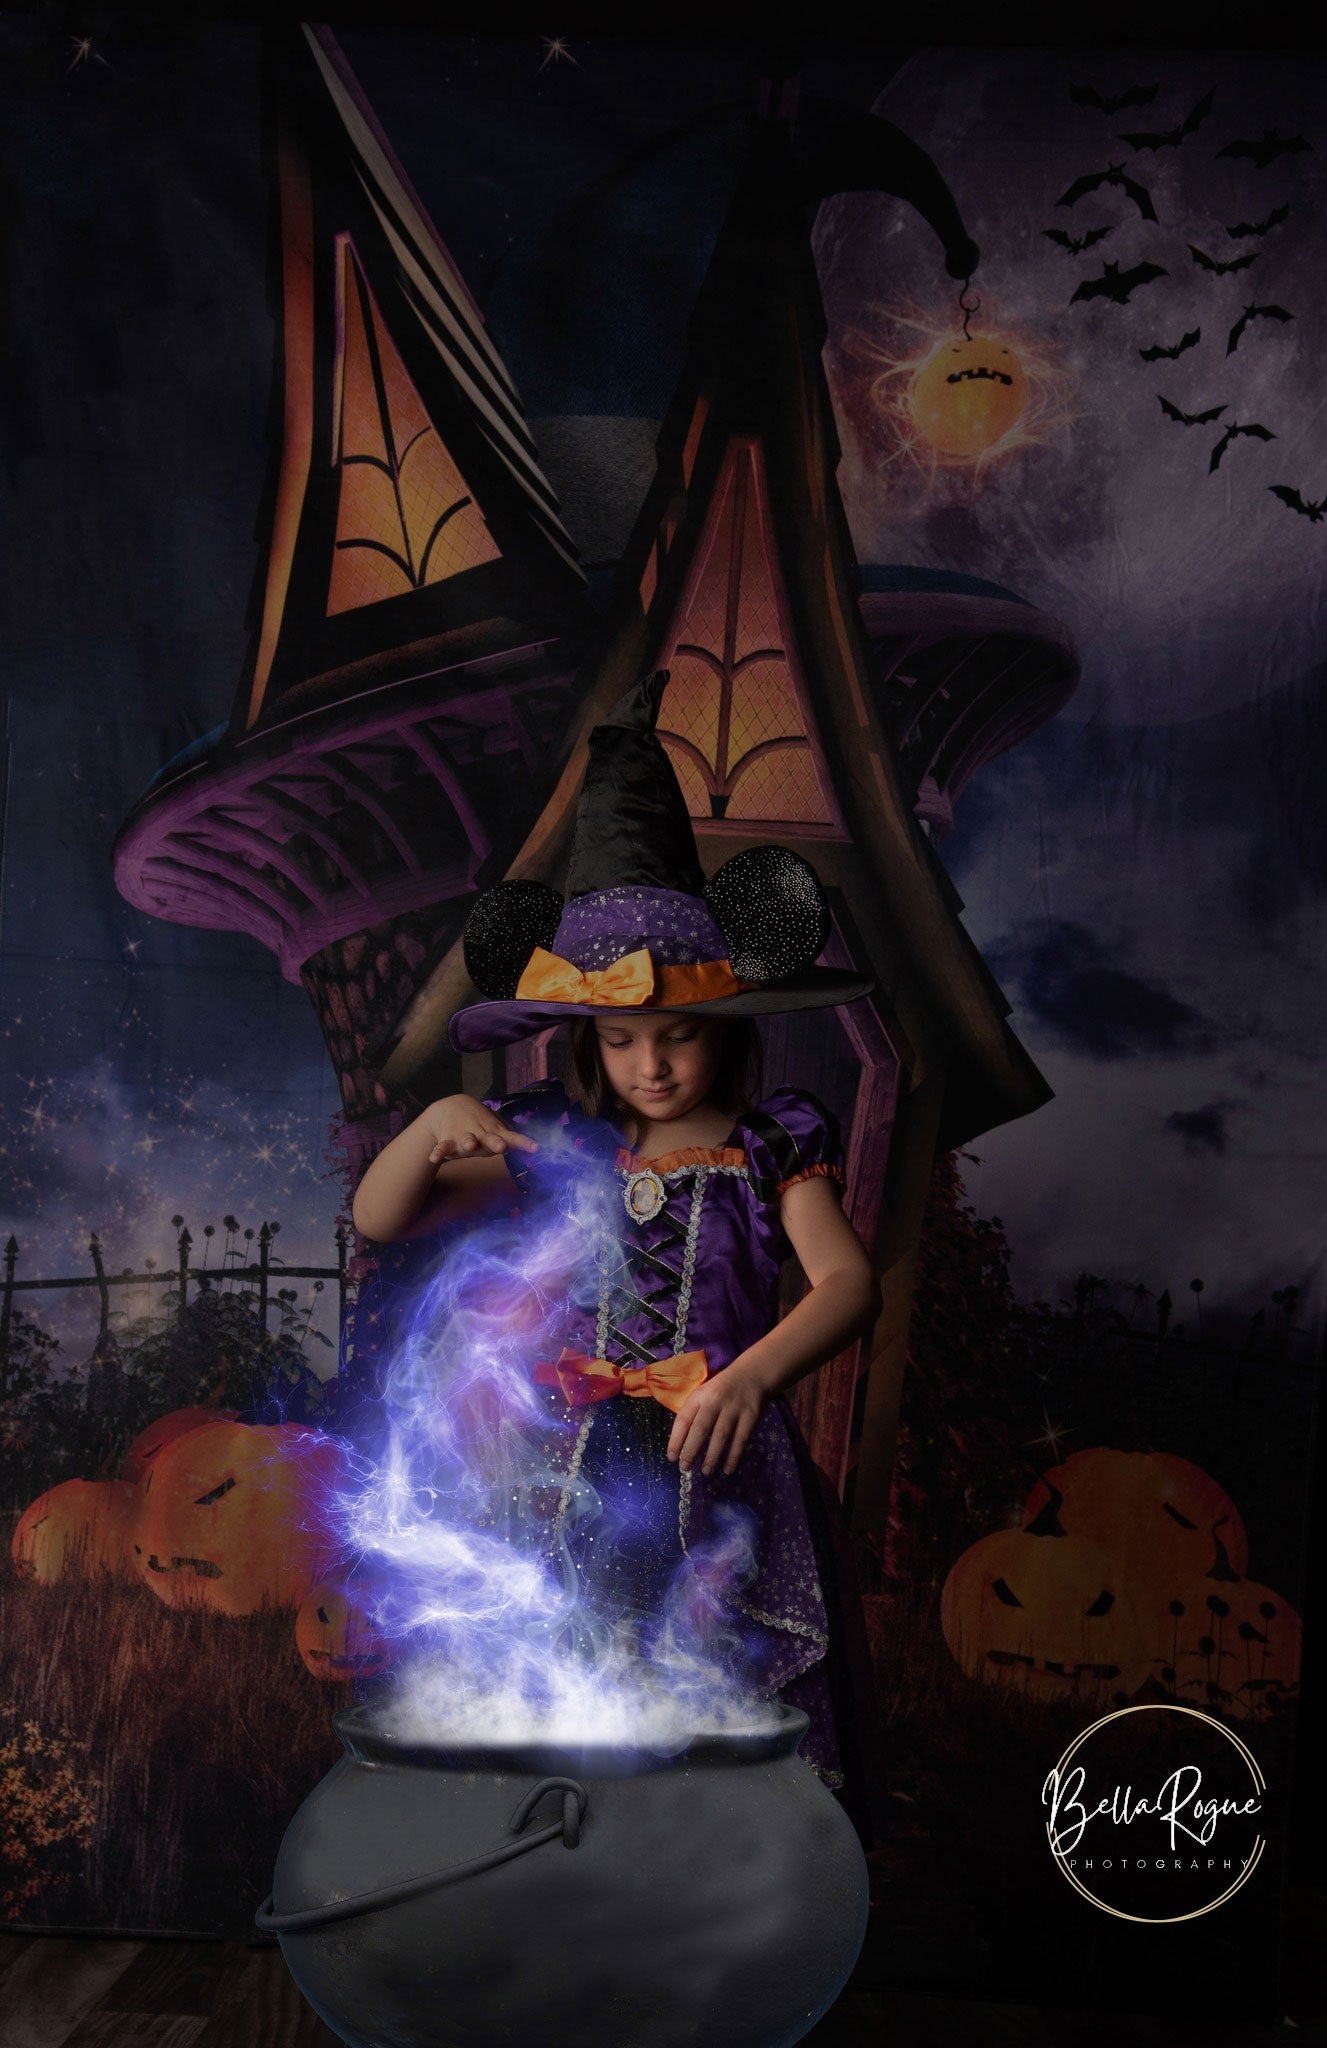 Magic House Purple Pumpkin Halloween Photography Backdrop for Party